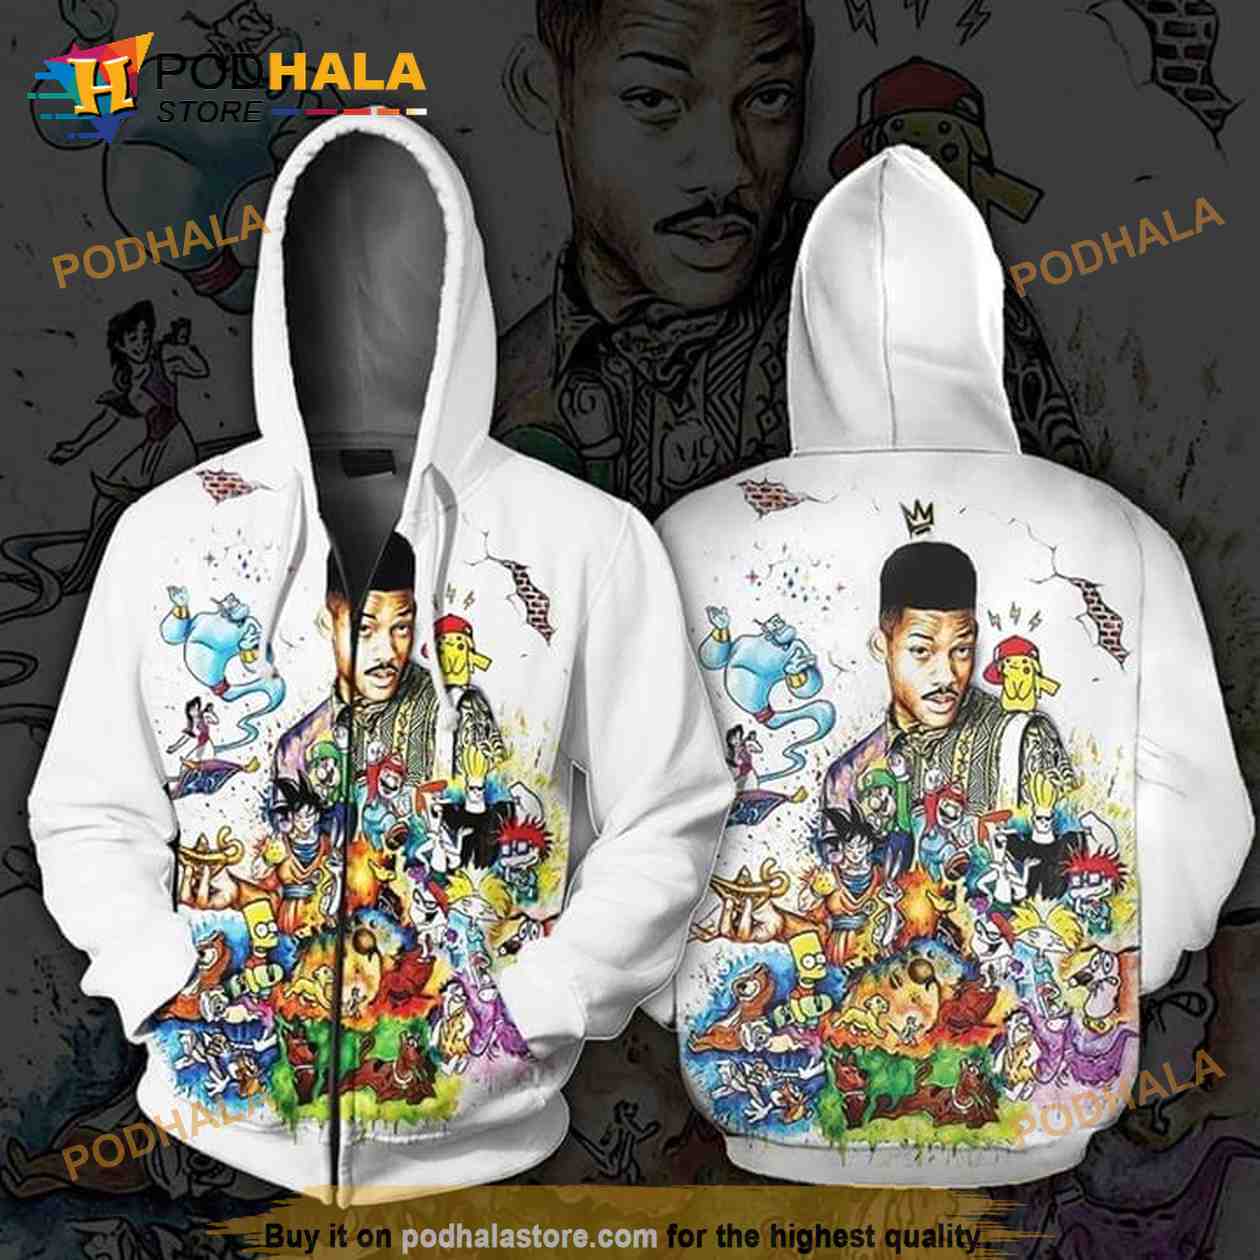 Will Smith Simpson Family Aladdin Dragon Ball Z Mario 3D Hoodie - Bring Your Ideas, Thoughts And Imaginations Into Reality Today